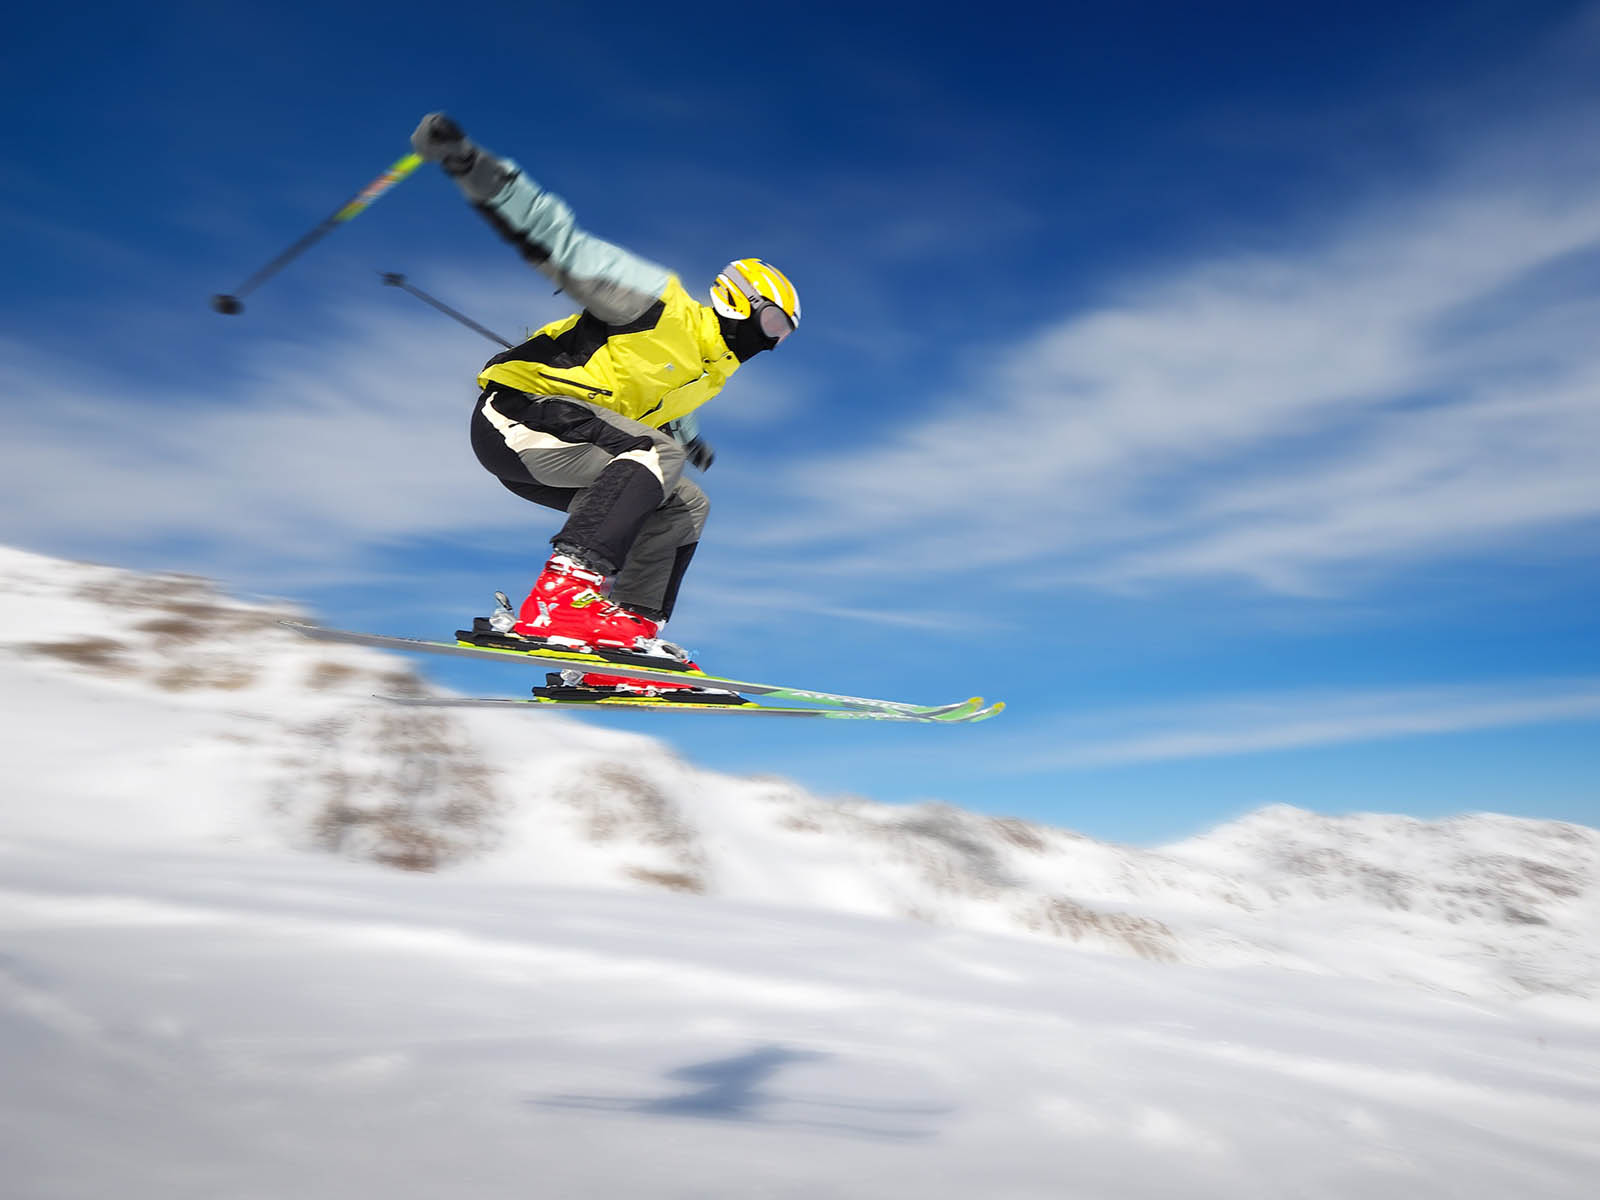 wallpapers: Free Skiing